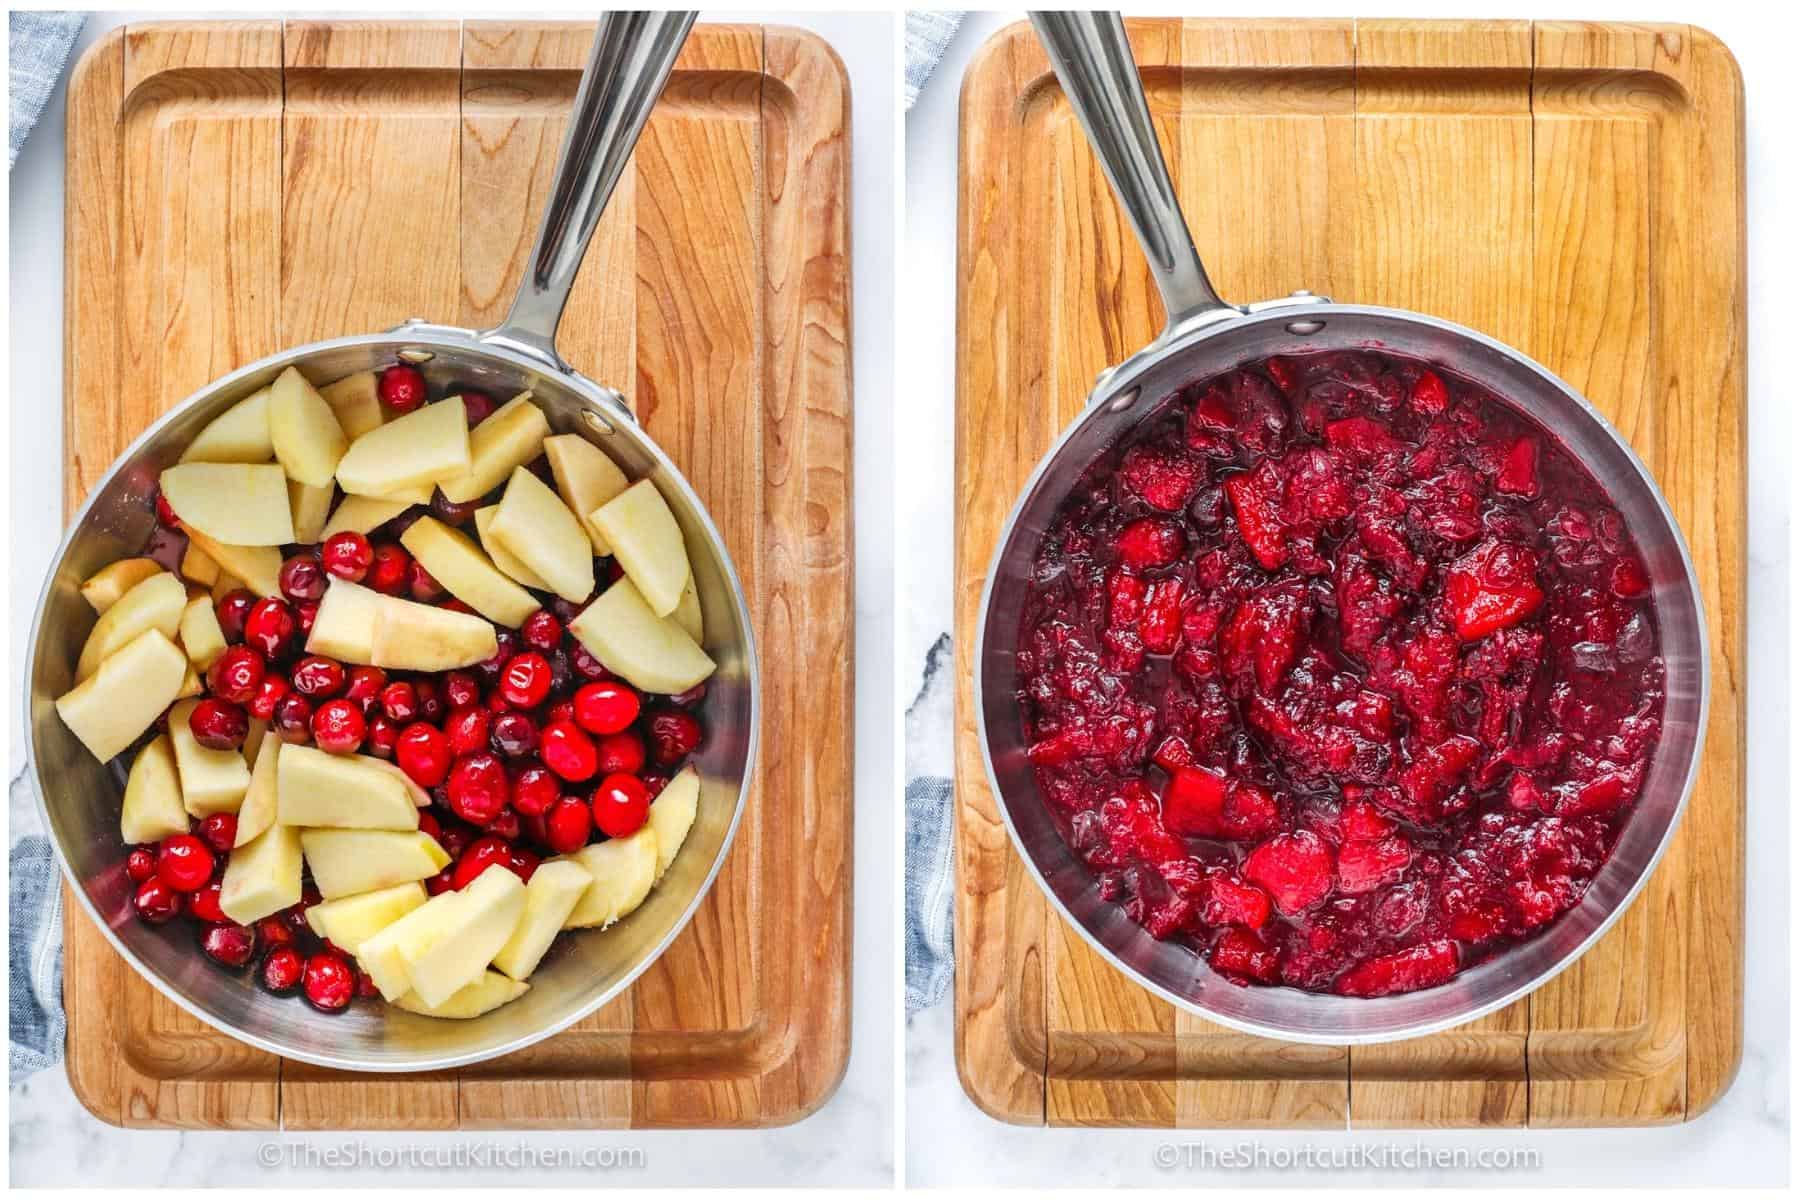 process of adding ingredients together to make Fresh Cranberry Apple Sauce